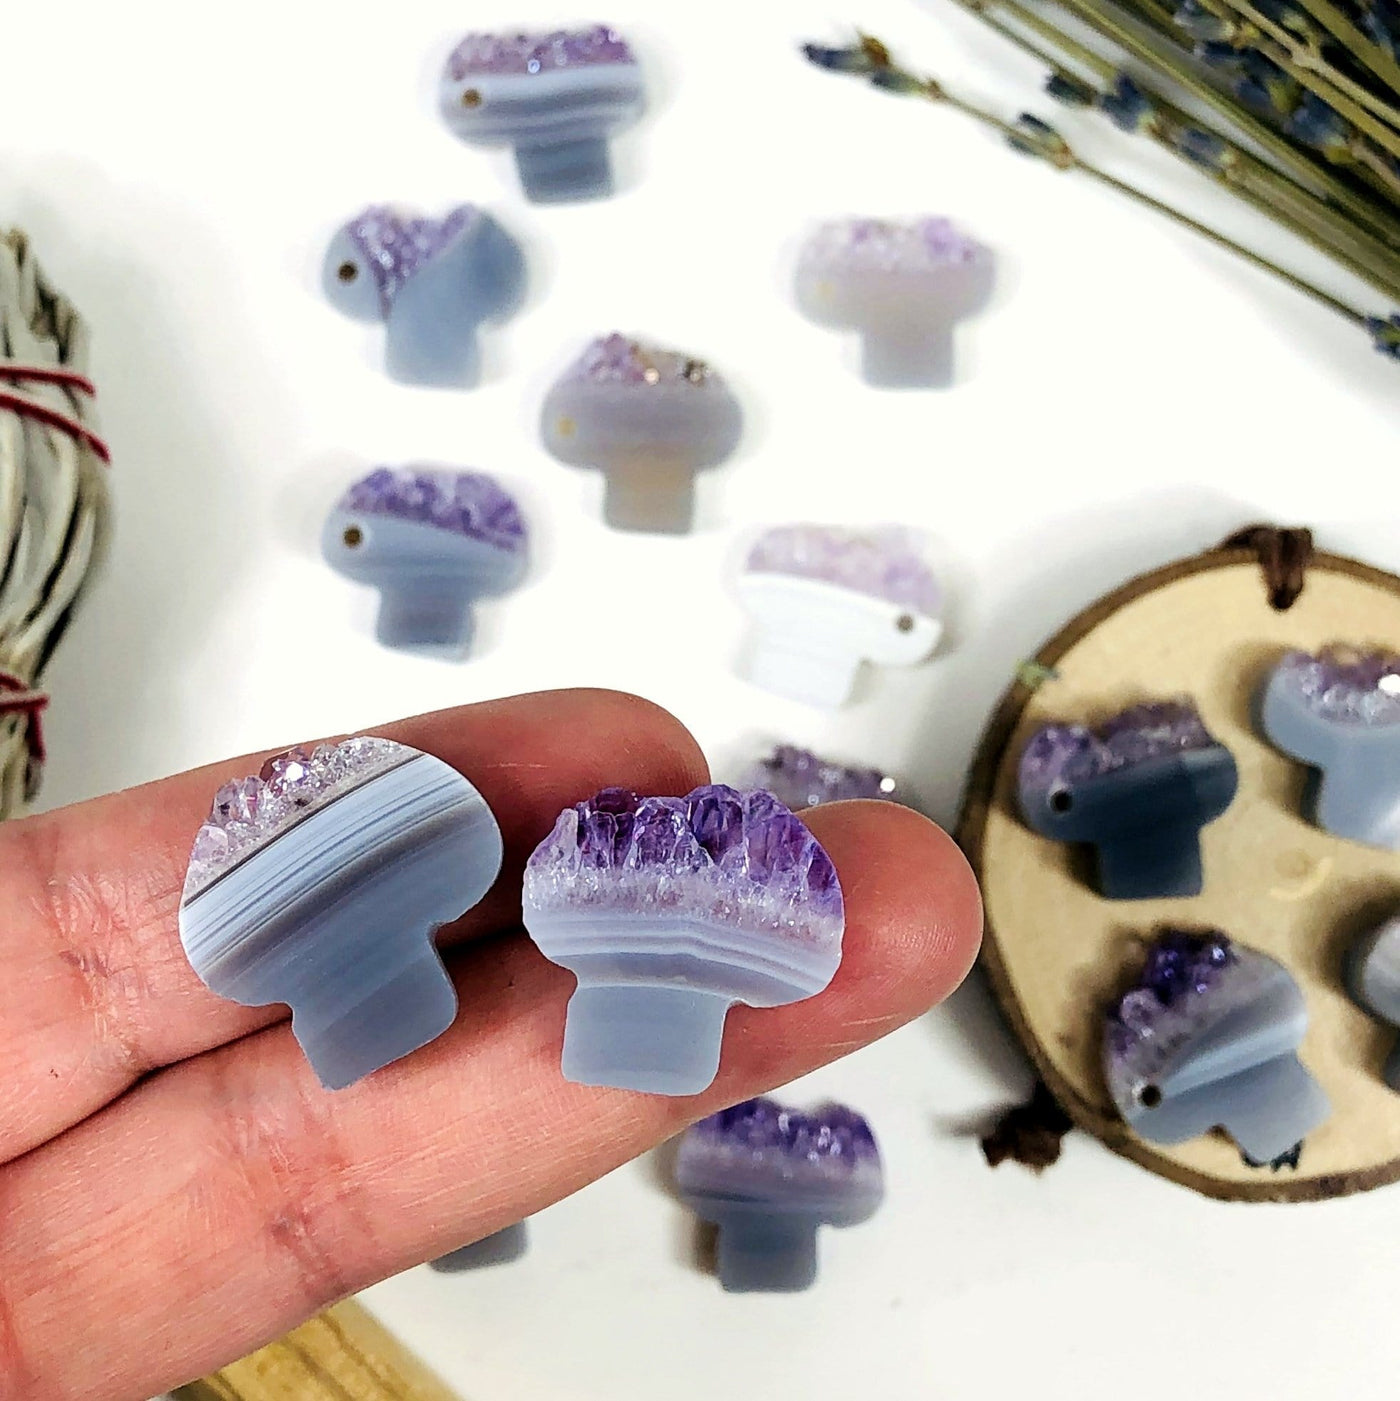 Amethyst slice cut into mushroom shapes with a drill hole on the side.  This photo shows an assortment as they range in colors and patterns with shades of white, gray, brown, purple and tan.  Two are held in a hand and the rest are in the background.